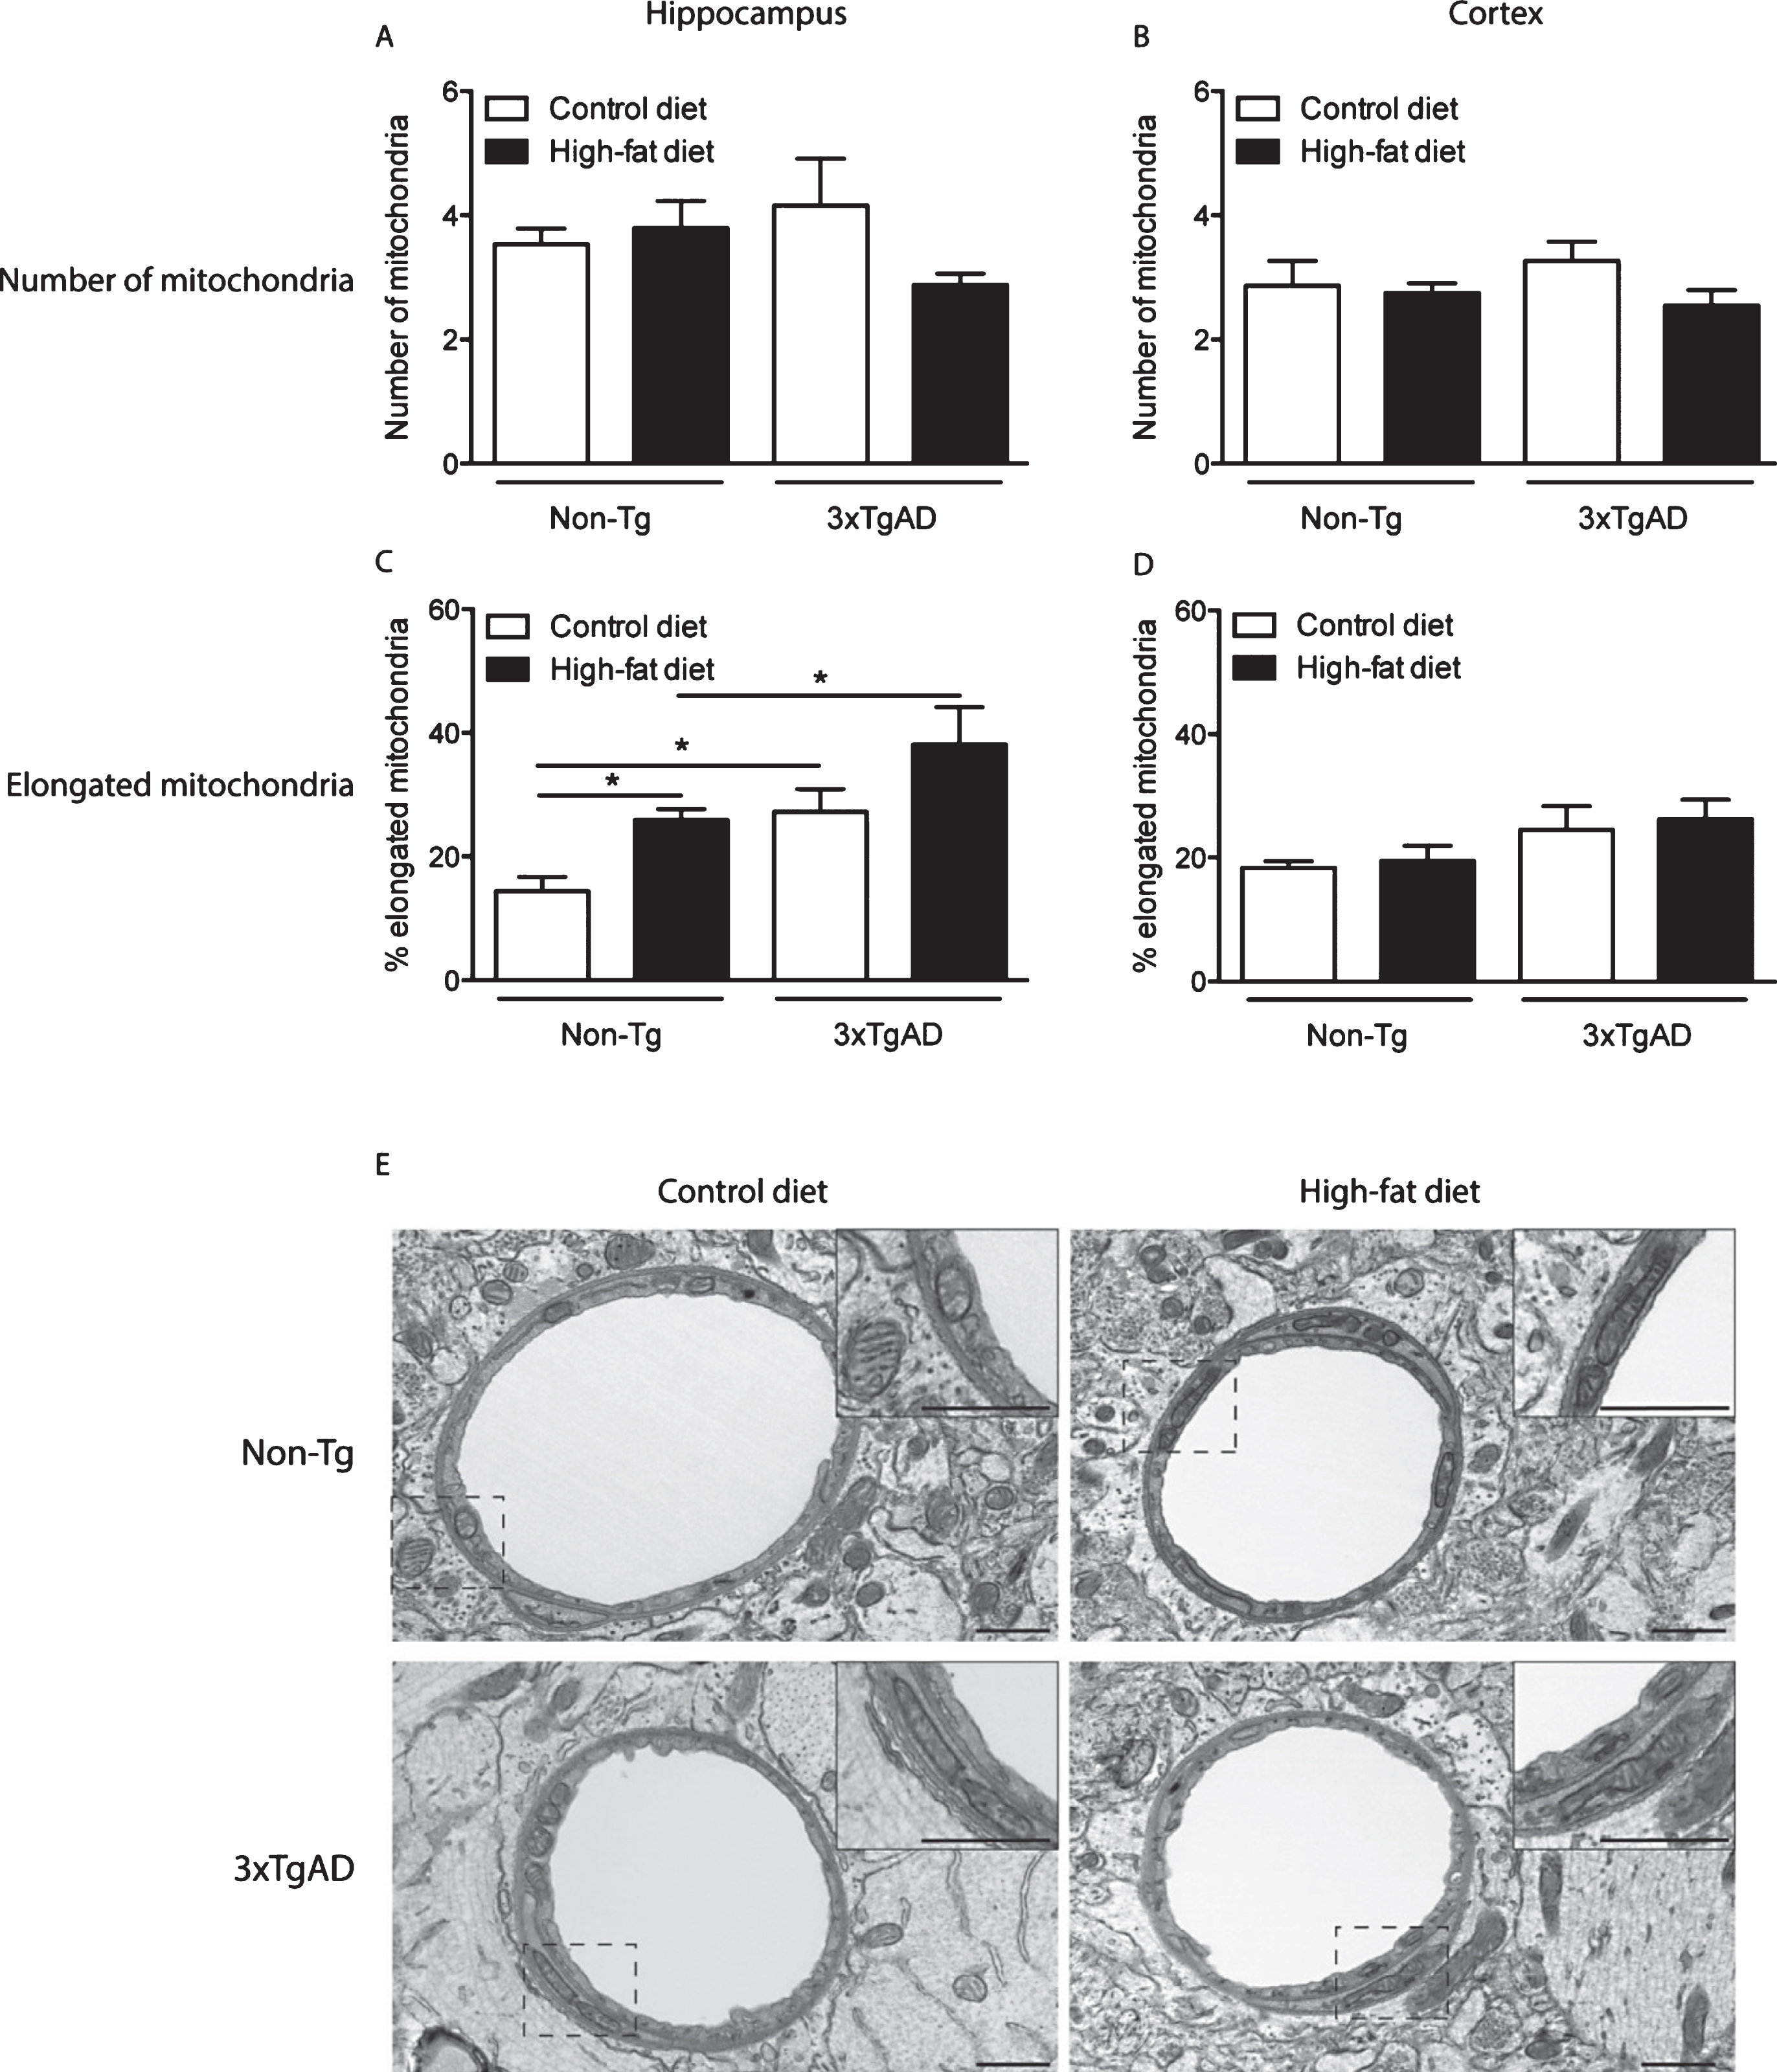 Mitochondrial length in hippocampal capillary endothelium is increased by a high-fat diet in Non-Tg control mice and in control fed 3xTgAD mice. Groups of Non-Tg and 3xTgAD mice were maintained on a control or high-fat diet from 2 months to 8 months of age and the number and length of endothelial mitochondria was measured in 10 random capillaries in the hippocampus (A, C) and cortex (B, D). The average number of mitochondria/capillary and the percentage of elongated mitochondria (defined as length > 0.5 μm) were calculated (A-D). Data are mean±SEM, n = 6-7/group (male and female). *p < 0.05; Two-way ANOVA with Bonferroni post hoc analysis. E) Electron micrographs illustrating the presence of mitochondria in the capillary endothelium in the hippocampus of Non-Tg and 3xTgAD mice fed a control or high-fat diet. High-fat fed Non-Tg and control and high-fat fed 3xTgAD mice presented with longer mitochondria compared to the normal endothelial mitochondria with round shape and form observed in control-fed Non-Tg mice. Dashed box represents the area of insert. Scale bars: 1 μm.